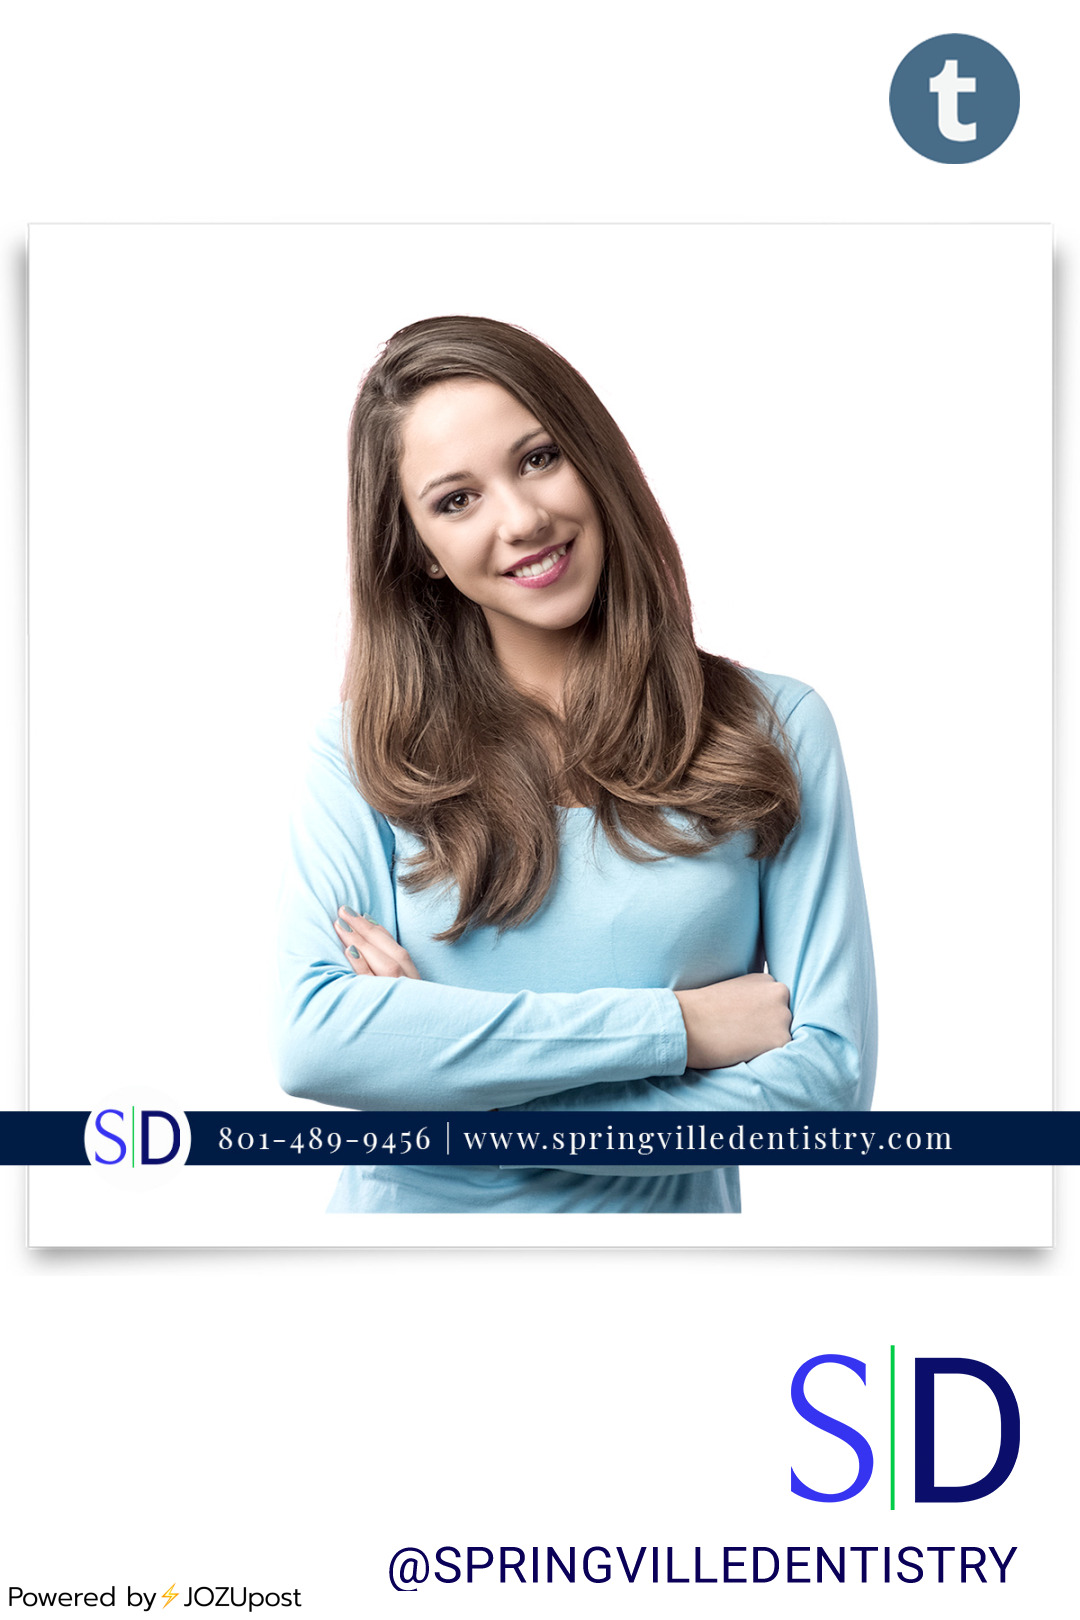 A bright smile can light up a room and reflects optimum dental health.
Healthy teeth boost self-esteem and confidence.
Springville Dentistry offers comprehensive dental care.
Experience services ranging from cleanings to complex procedures, all under...